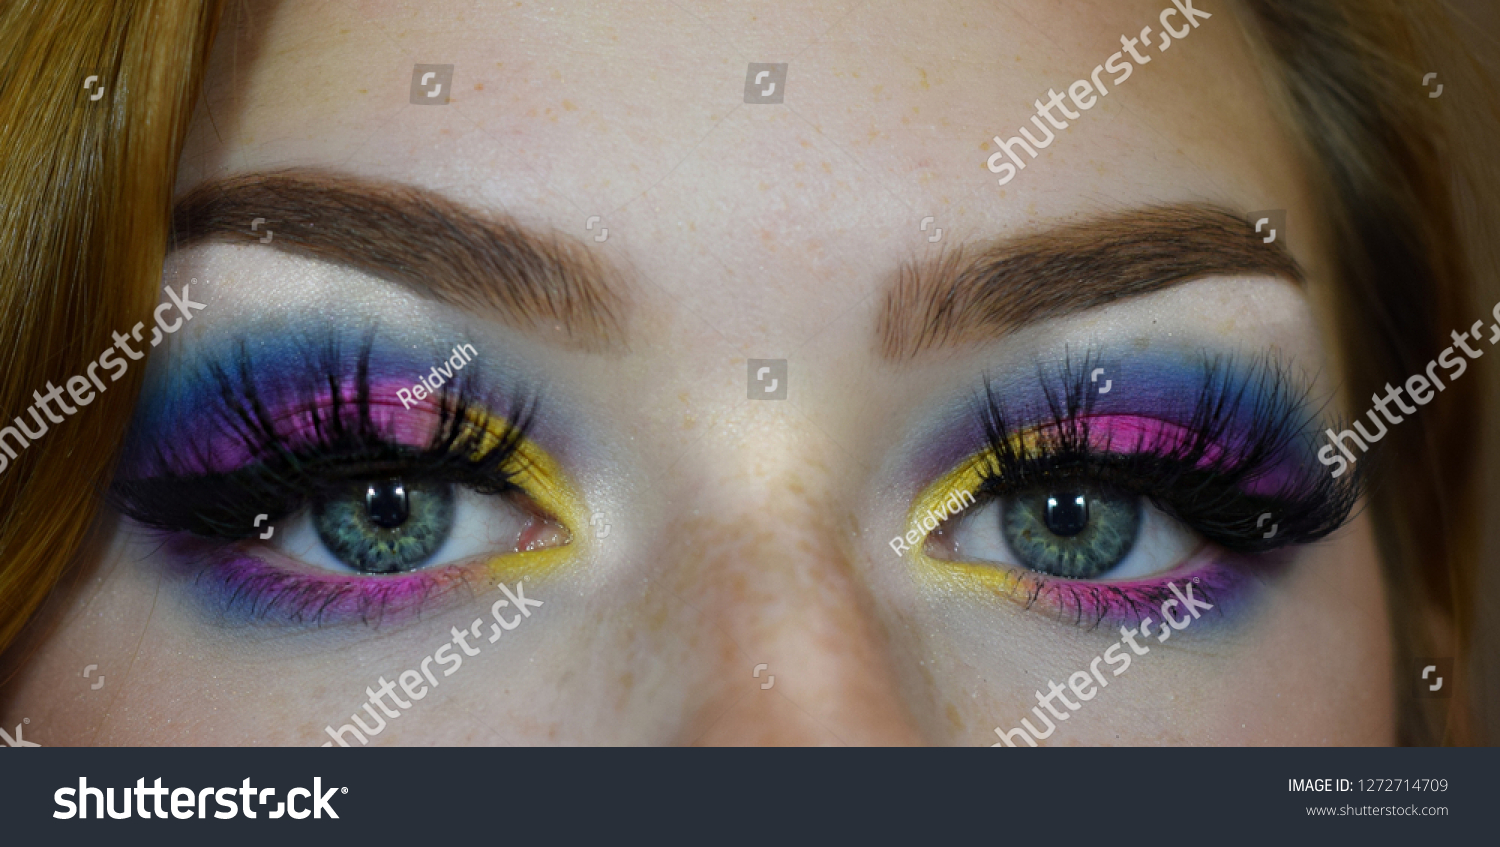 Colourful Makeup Long Lashes Blue Eyes Stock Photo Edit Now 1272714709